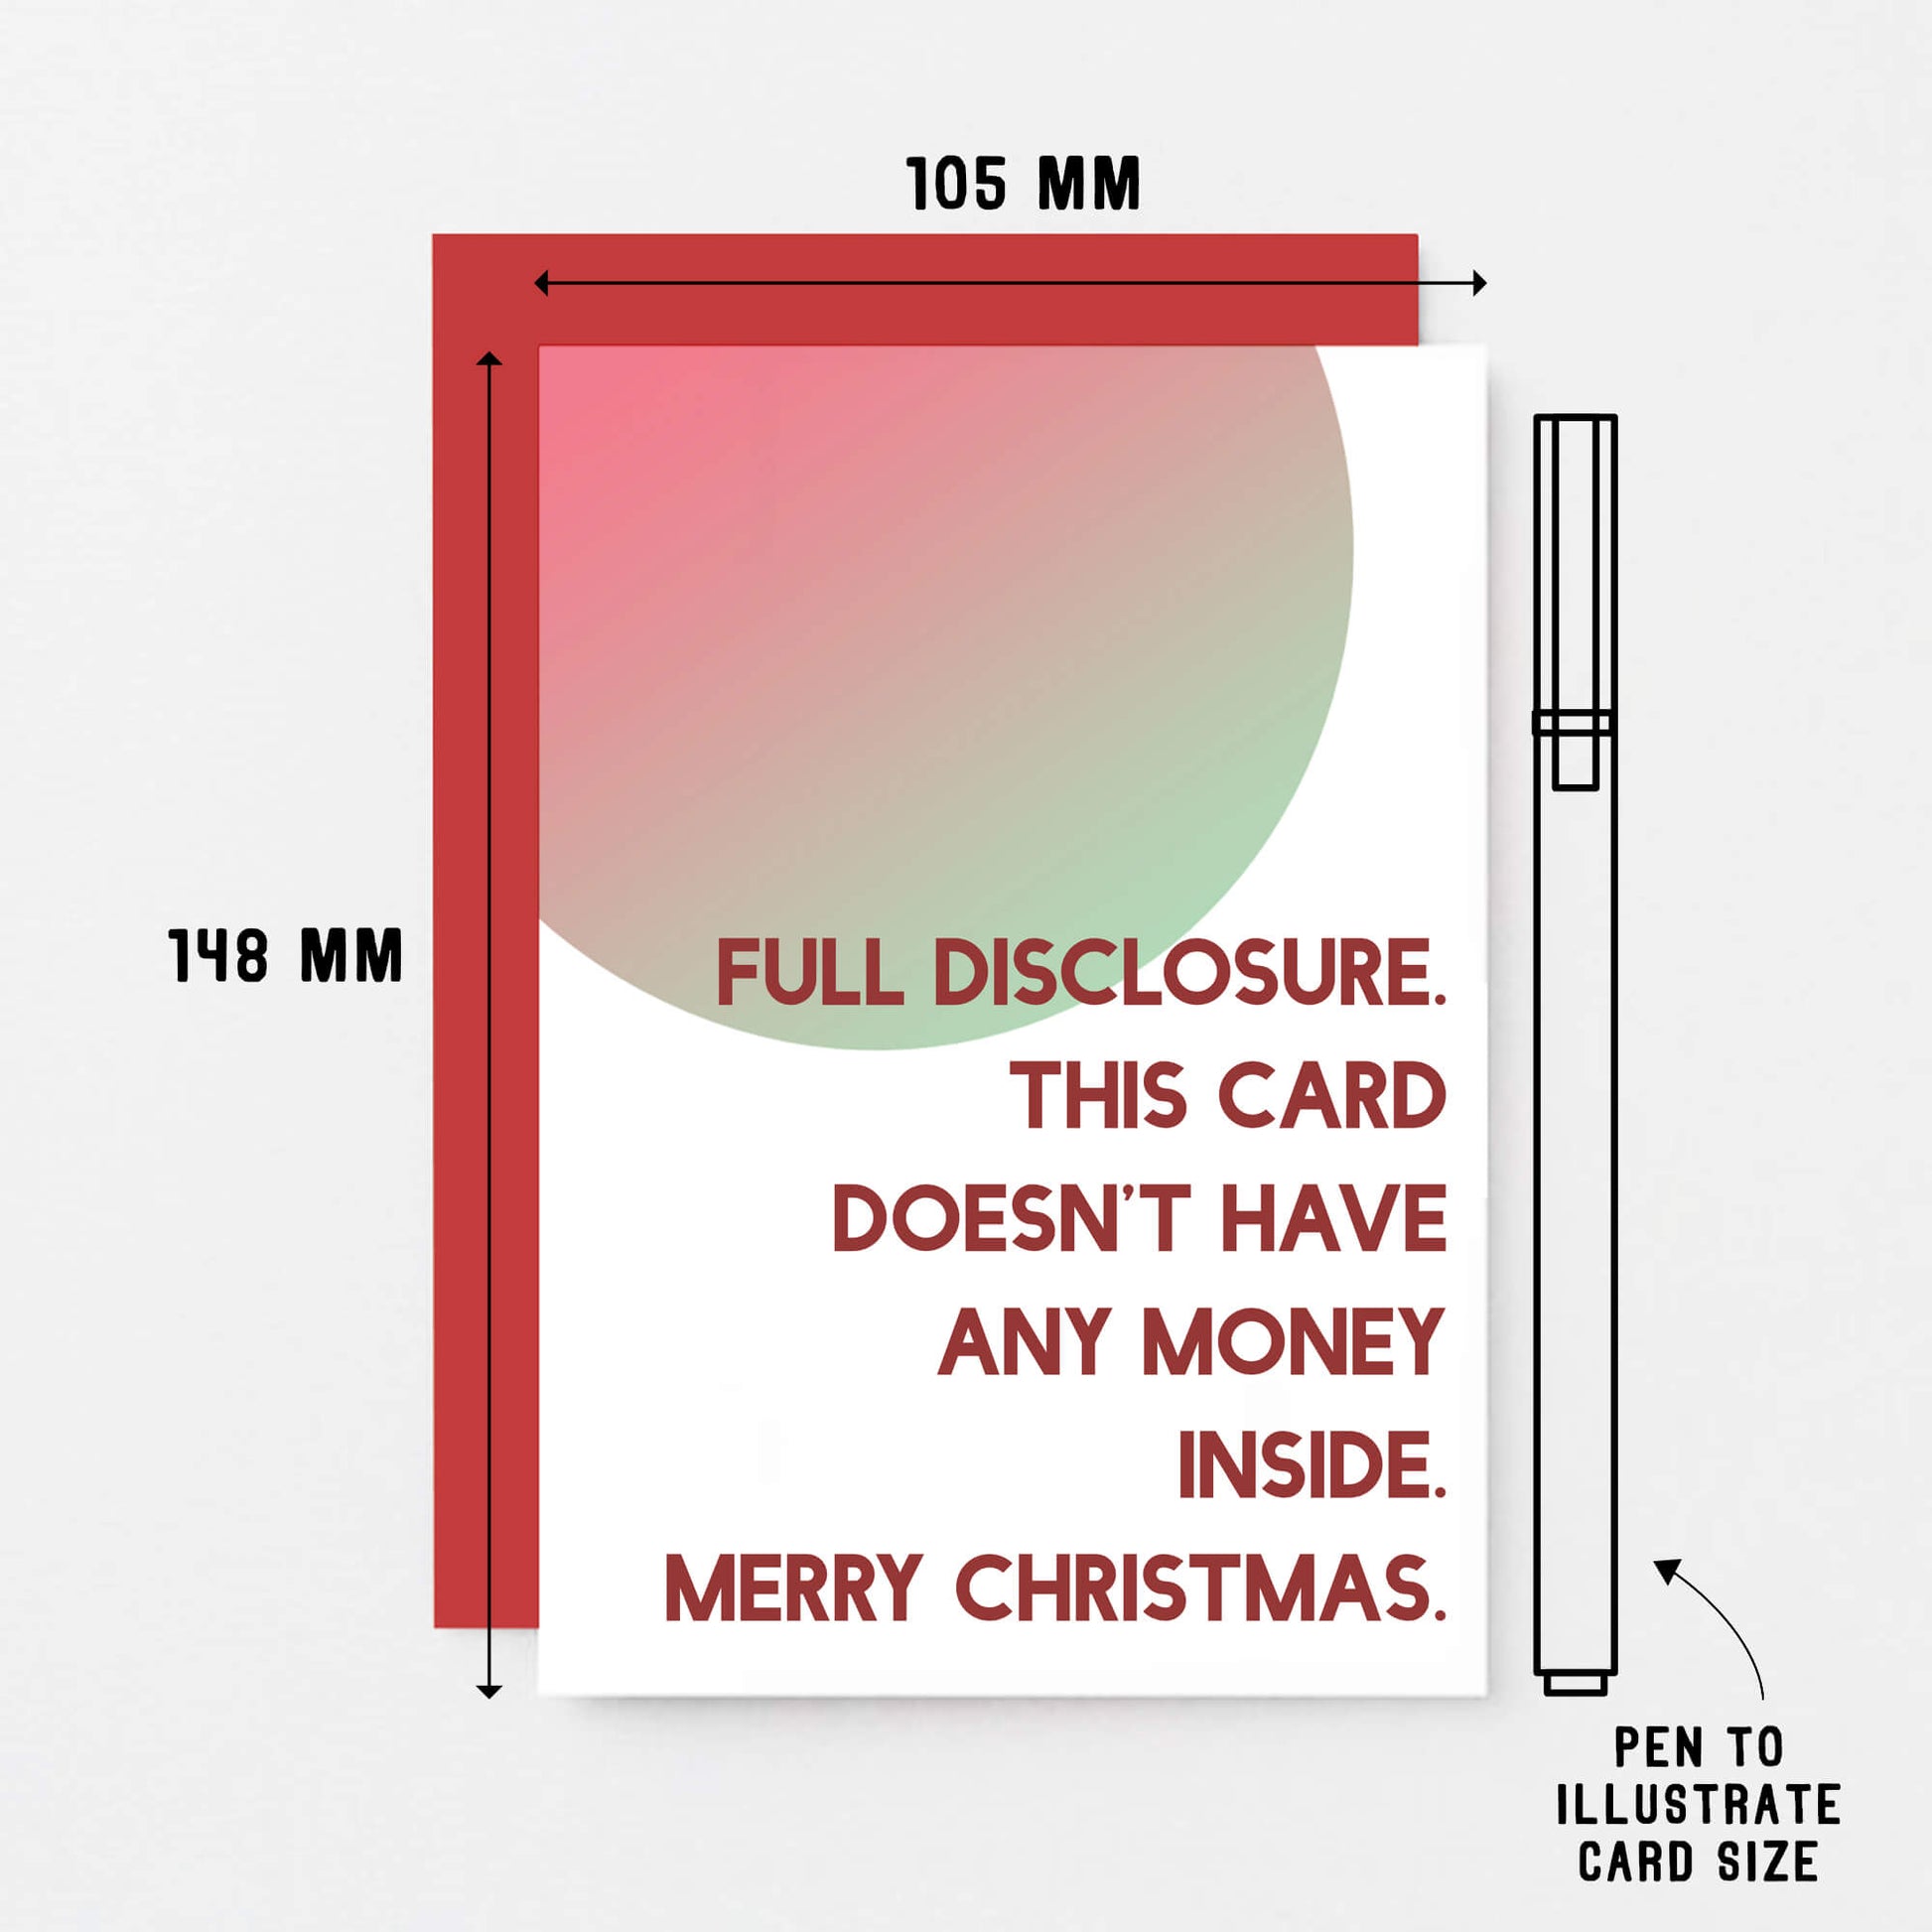 Christmas Card by SixElevenCreations. Reads Full disclosure. This card doesn't have any money inside. Merry Christmas. Product Code SEC0047A6